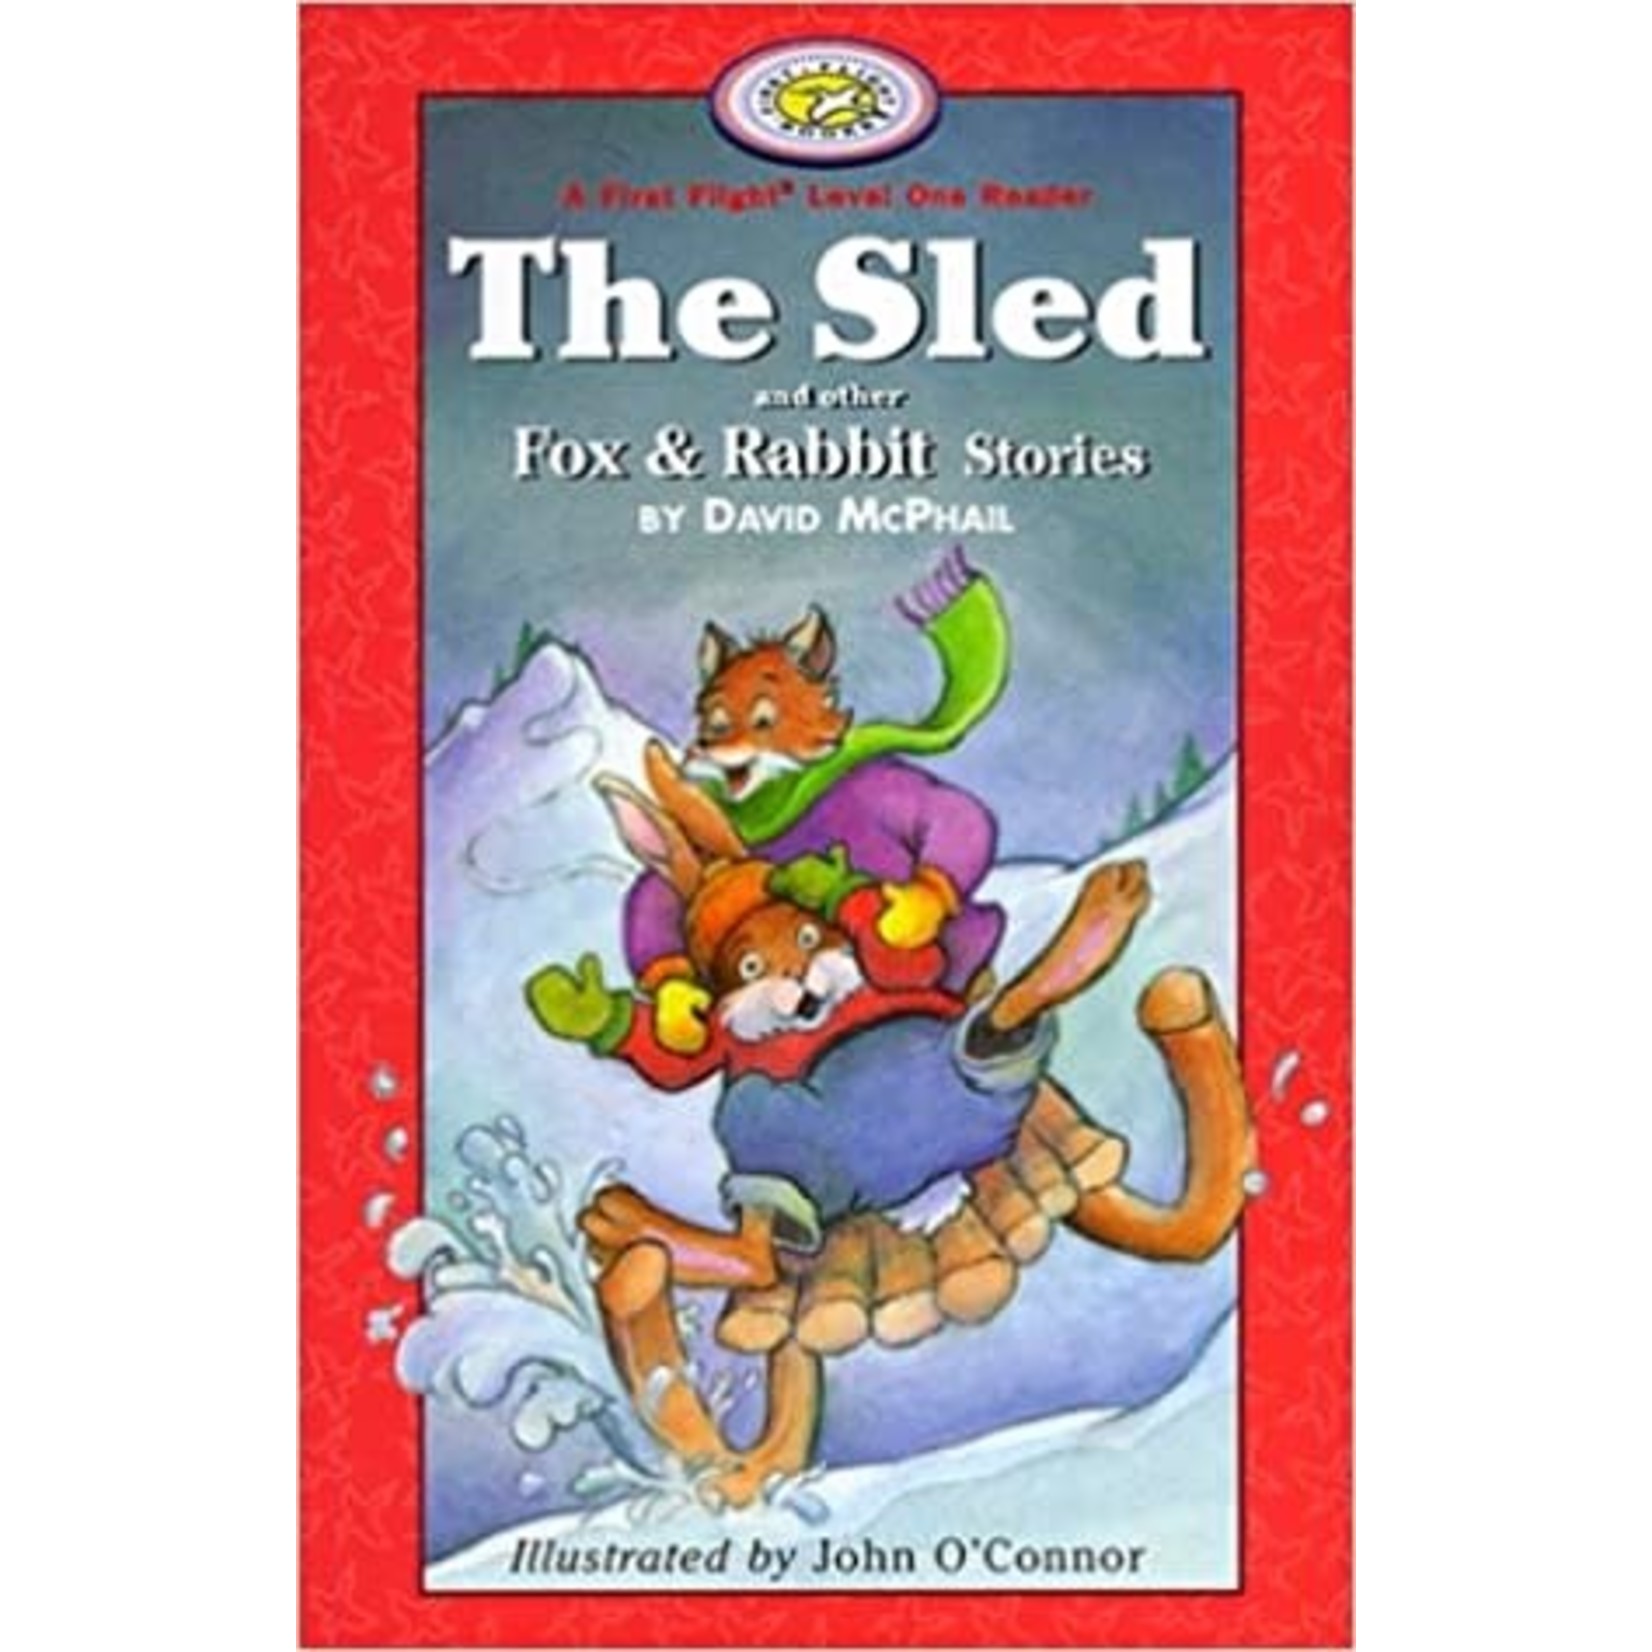 The Sled and other Fox & Rabbit Stories (A First Flight, Level 1 Reader